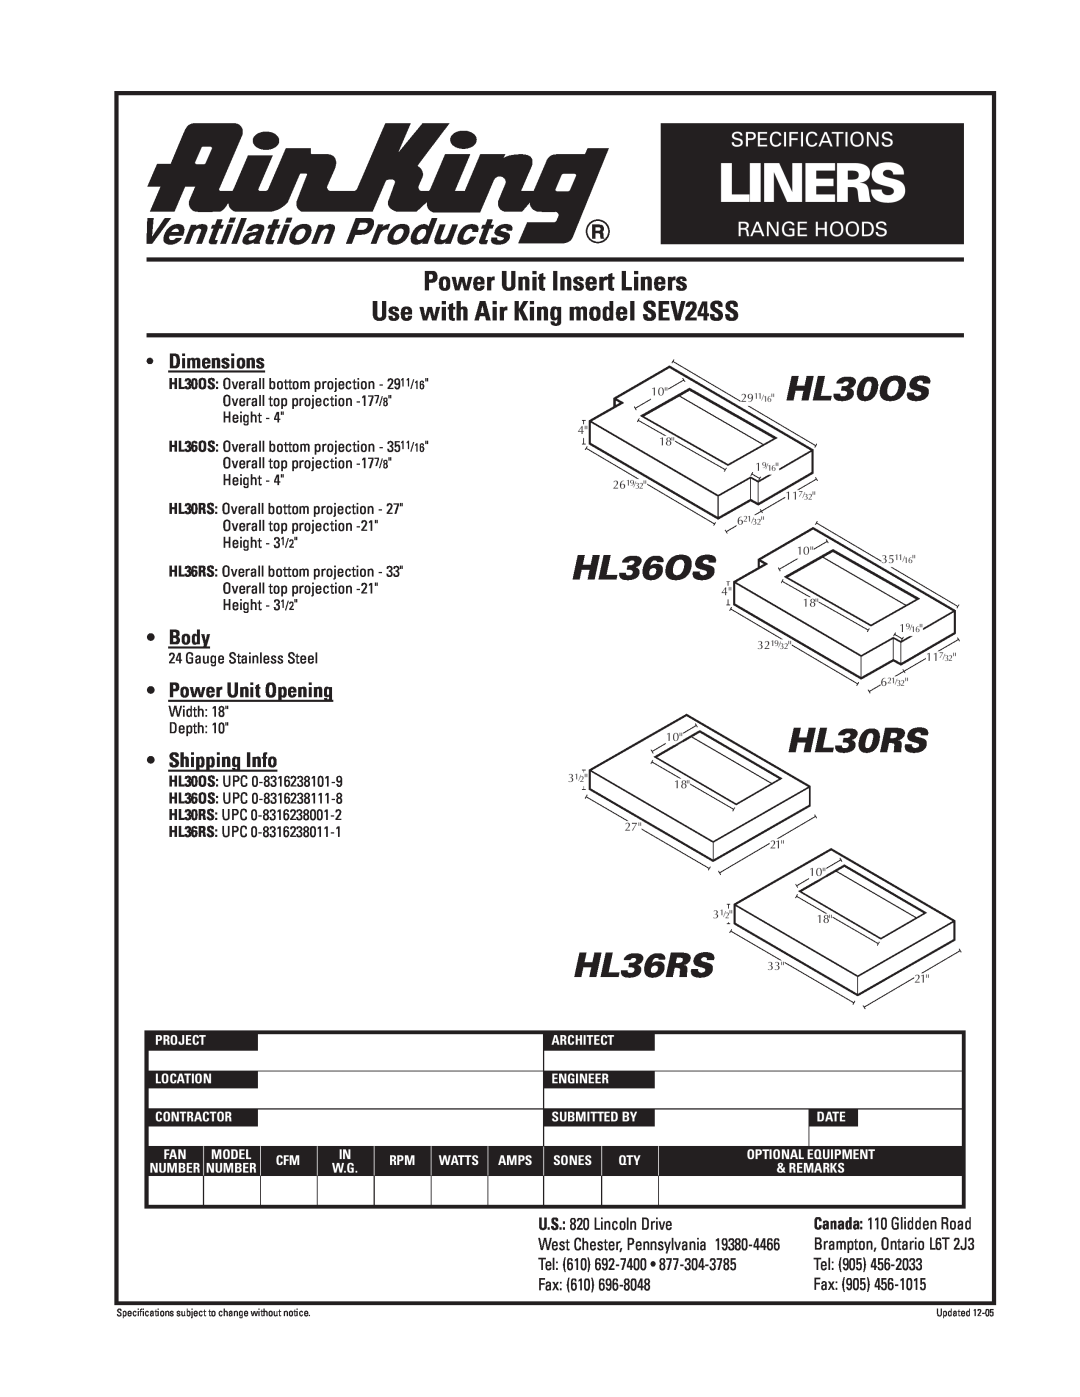 Air King LINERS specifications 2911/16HL30OS, HL36OS, 10HL30RS, HL36RS, Power Unit Insert Liners, Specifications, Body 